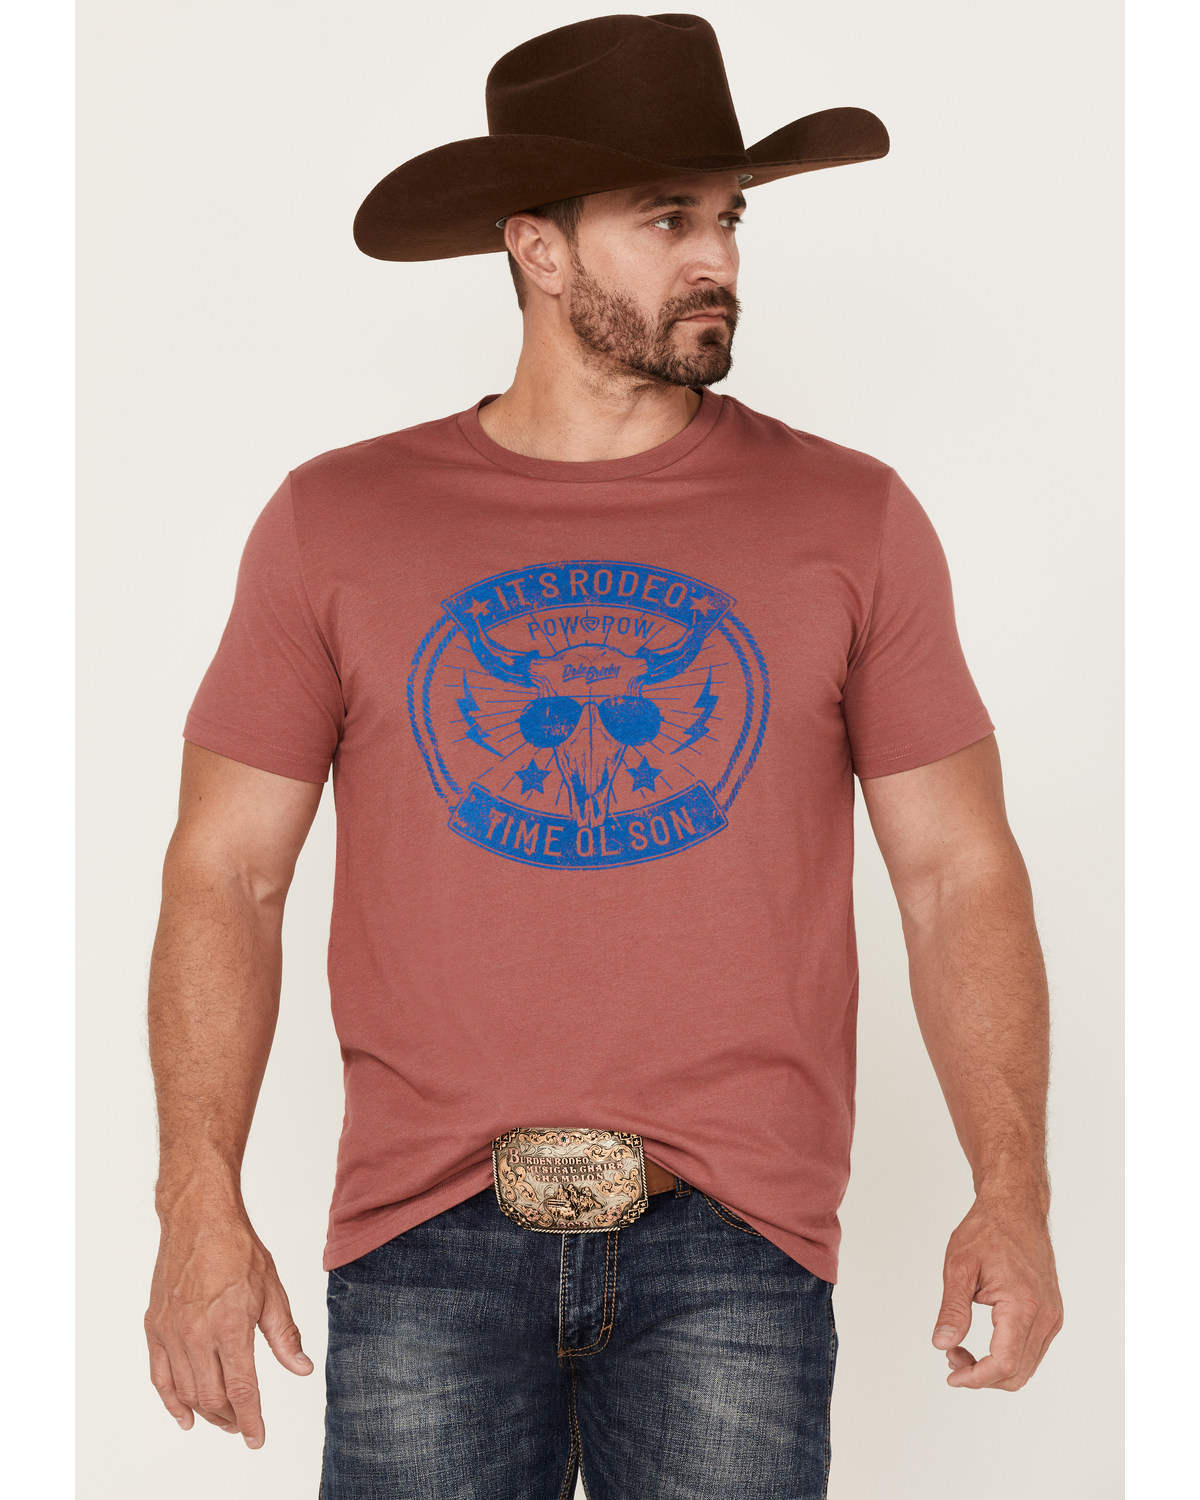 Dale Brisby Men's Rodeo Ol' Son Steerhead Skull Graphic Short Sleeve T-Shirt